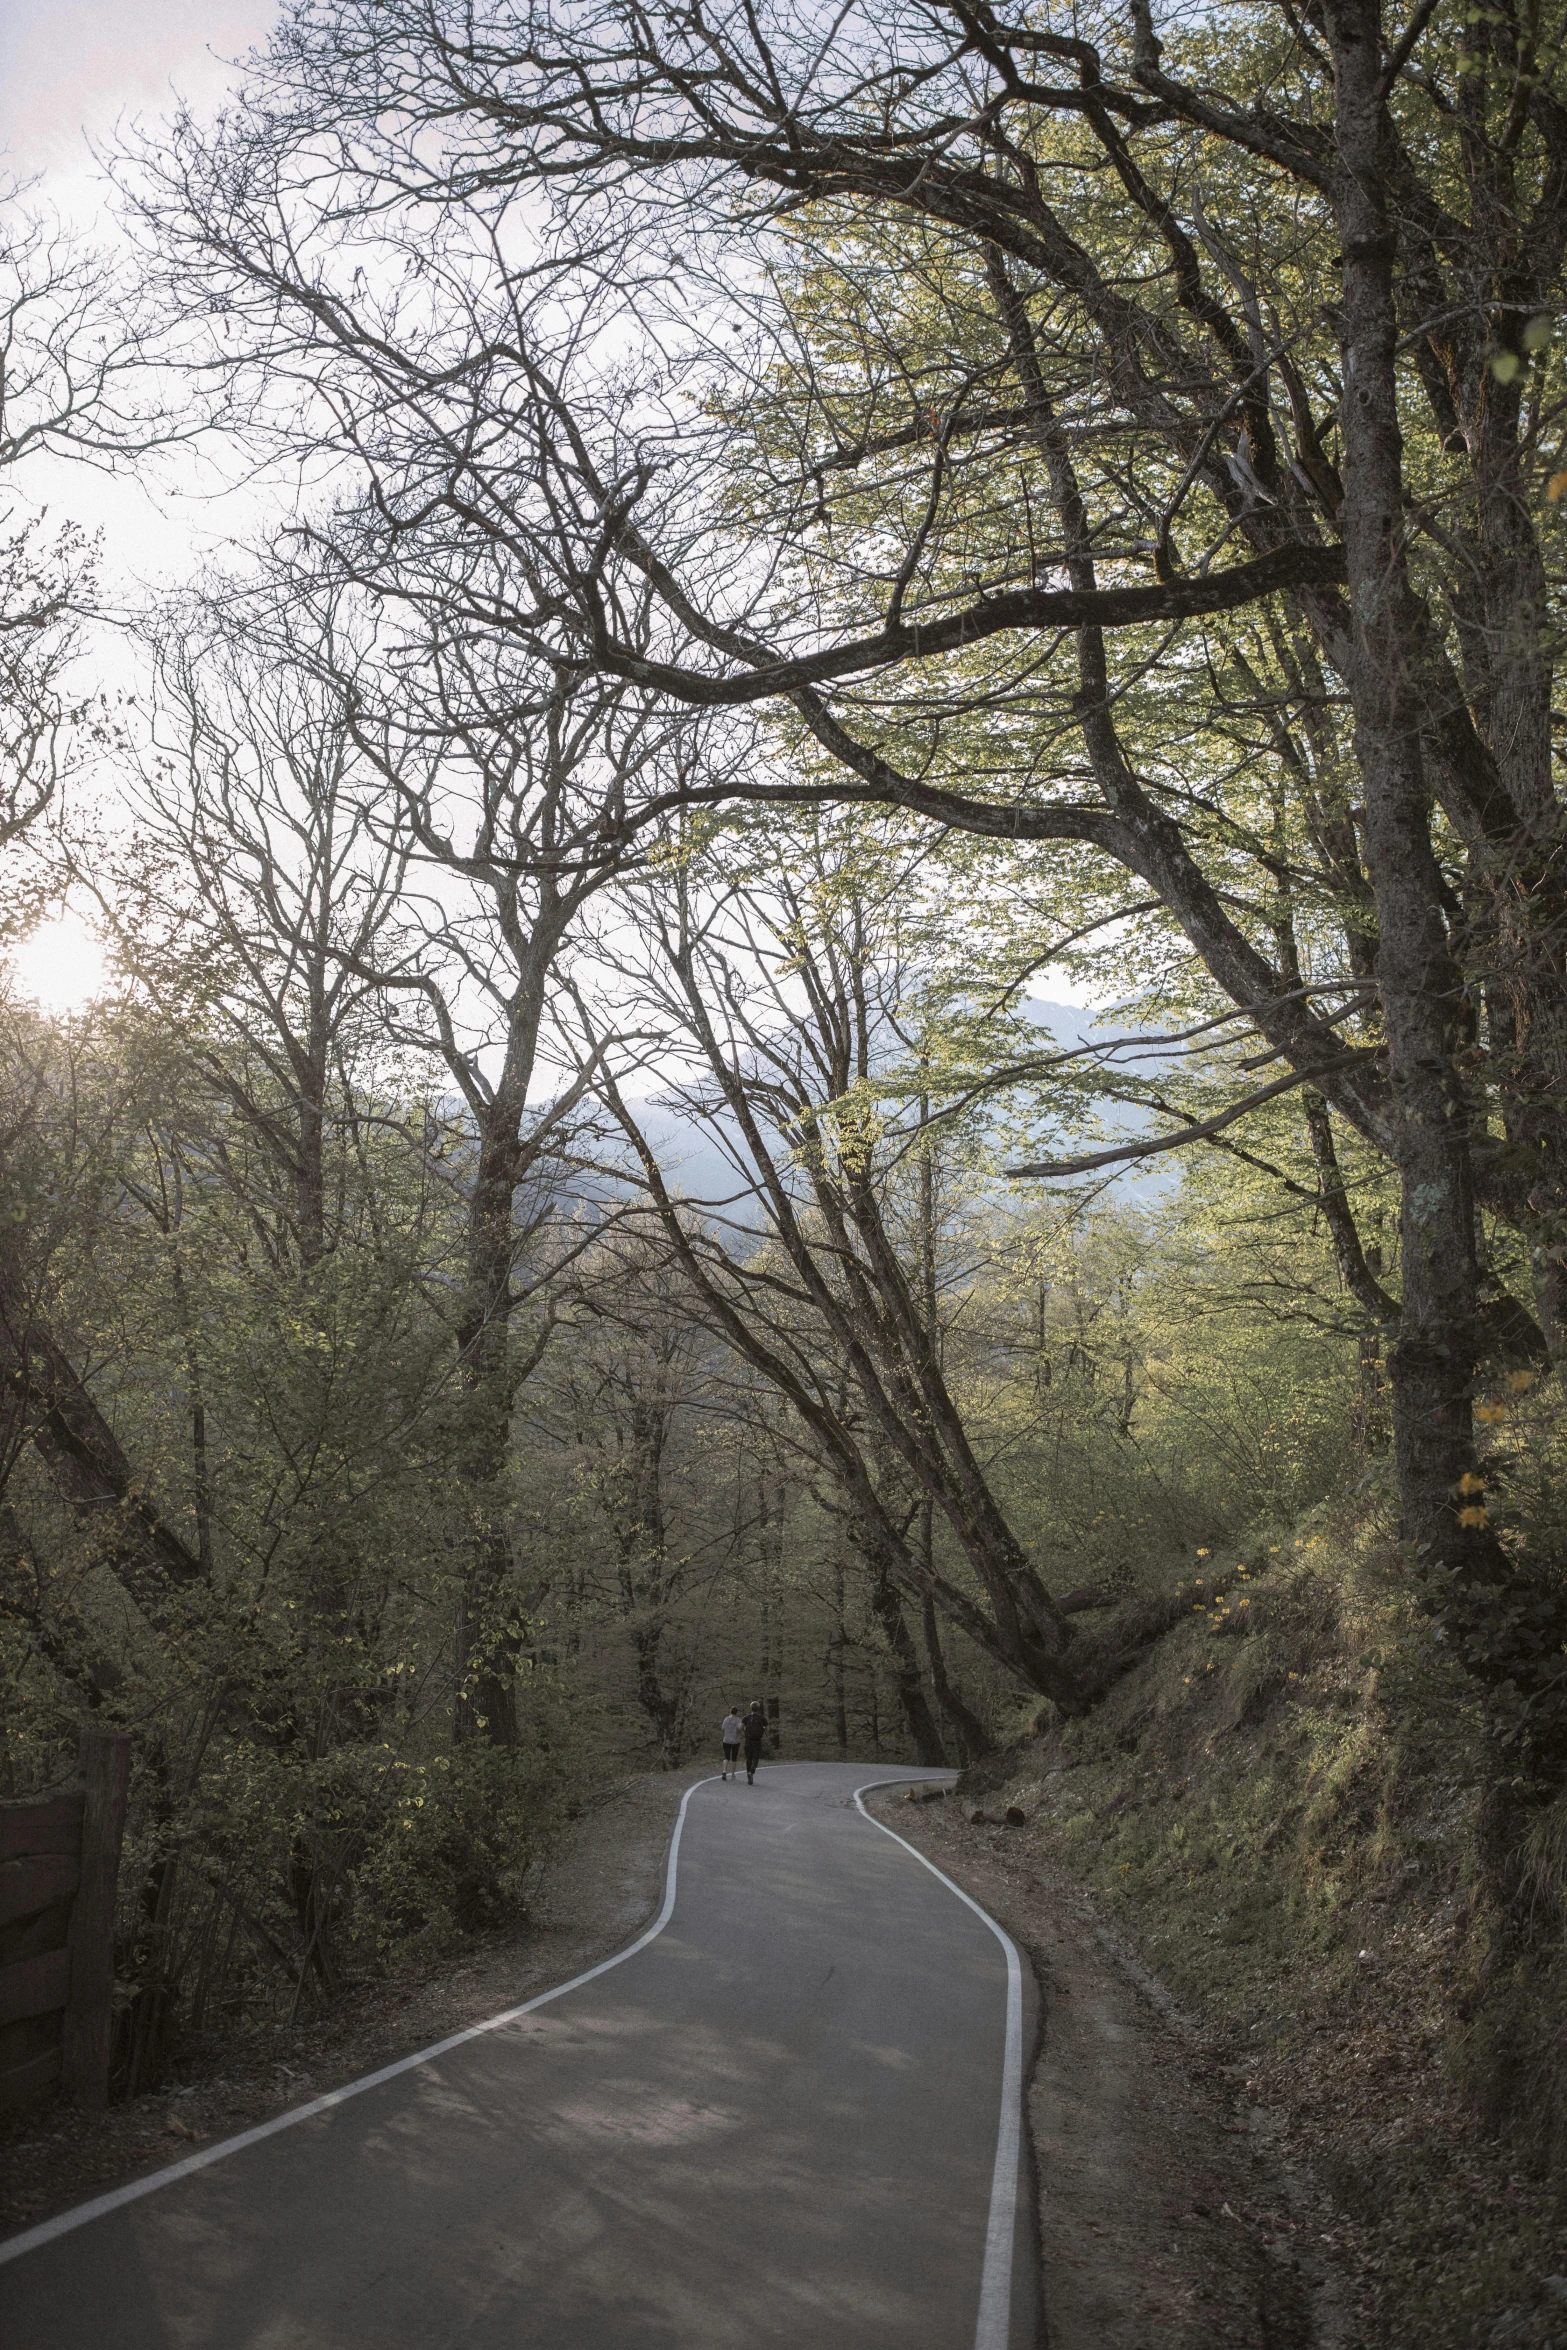 a man riding a motorcycle down a curvy road, a picture, unsplash contest winner, romanticism, twisted trees, greece, early spring, wales